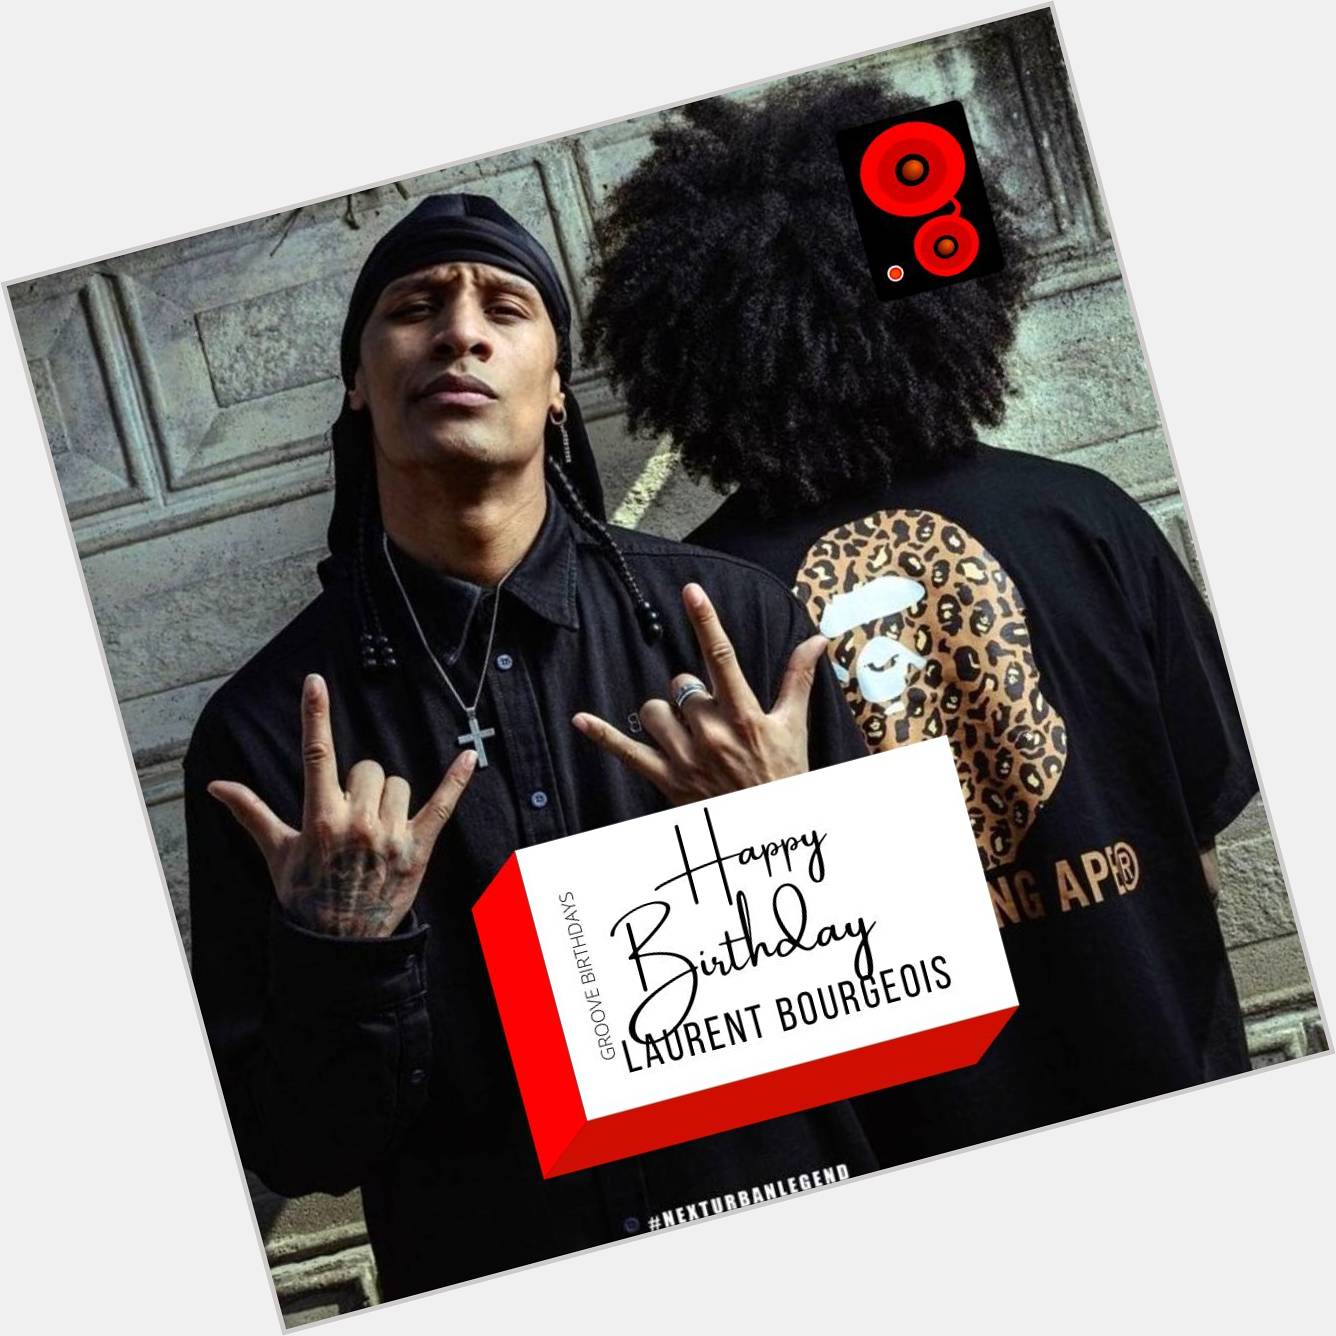 Happy birthday to Les Twins, Laurent Bourgeois!  